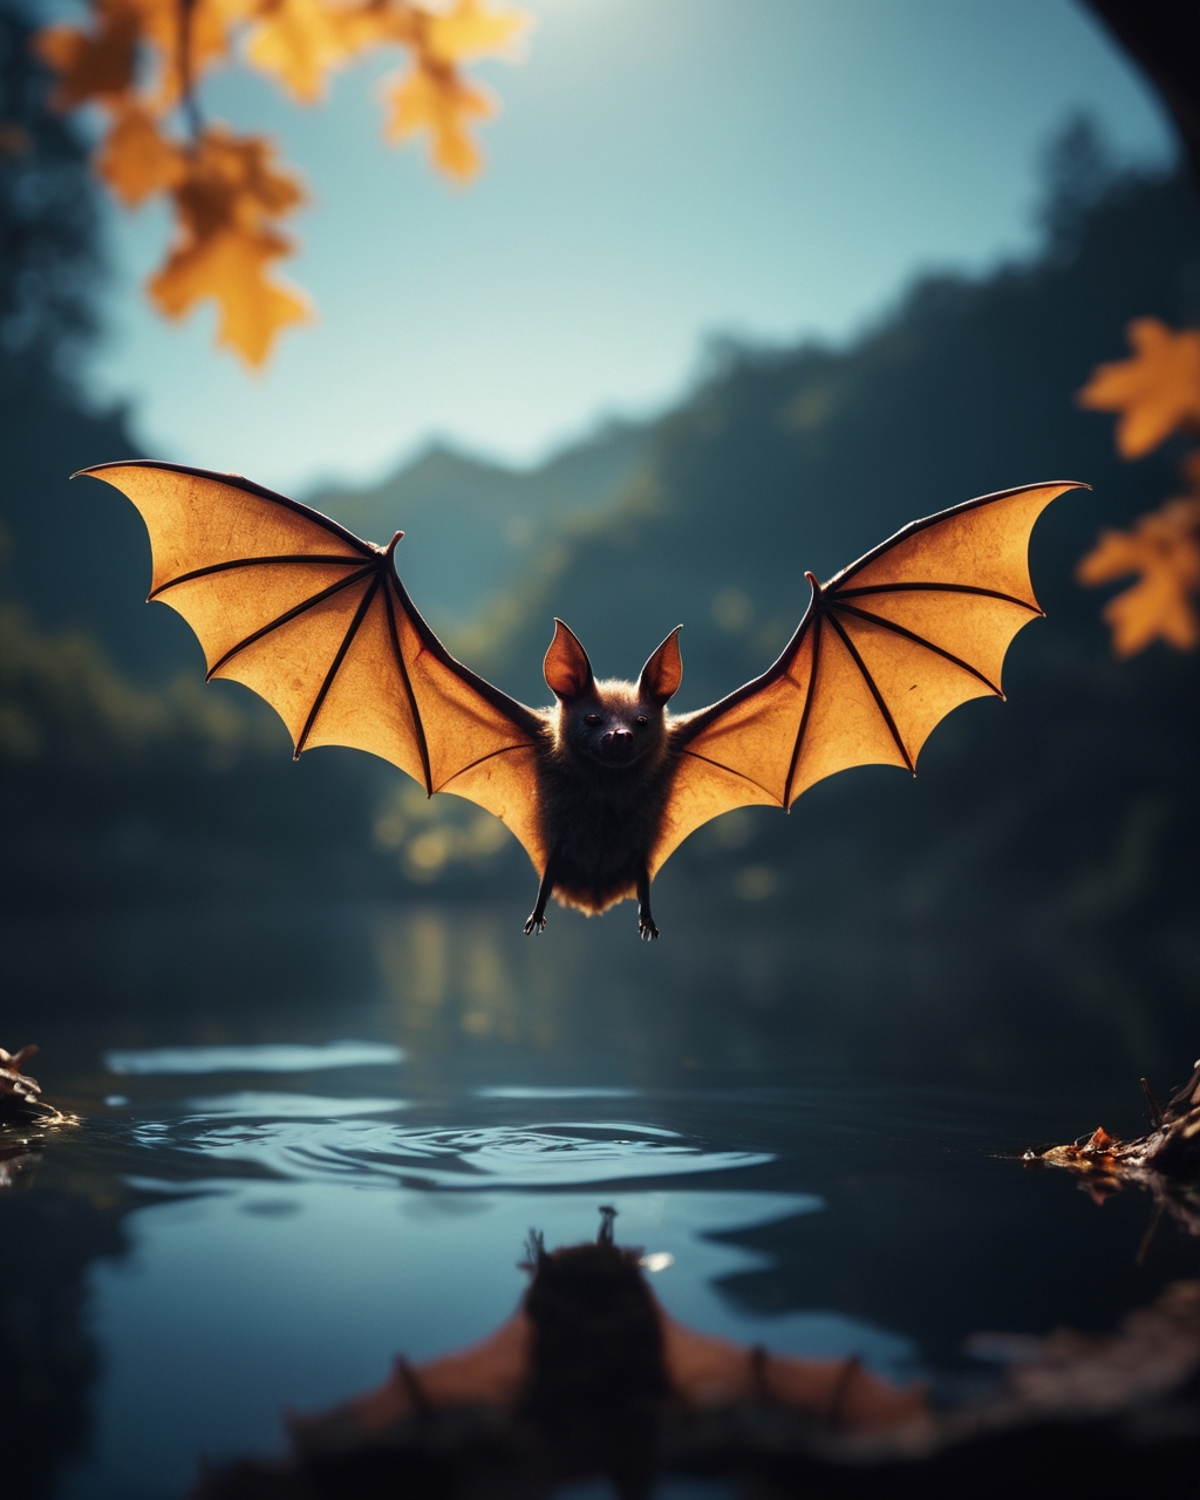 A Bat Flying Over Water with Leaves in the Background